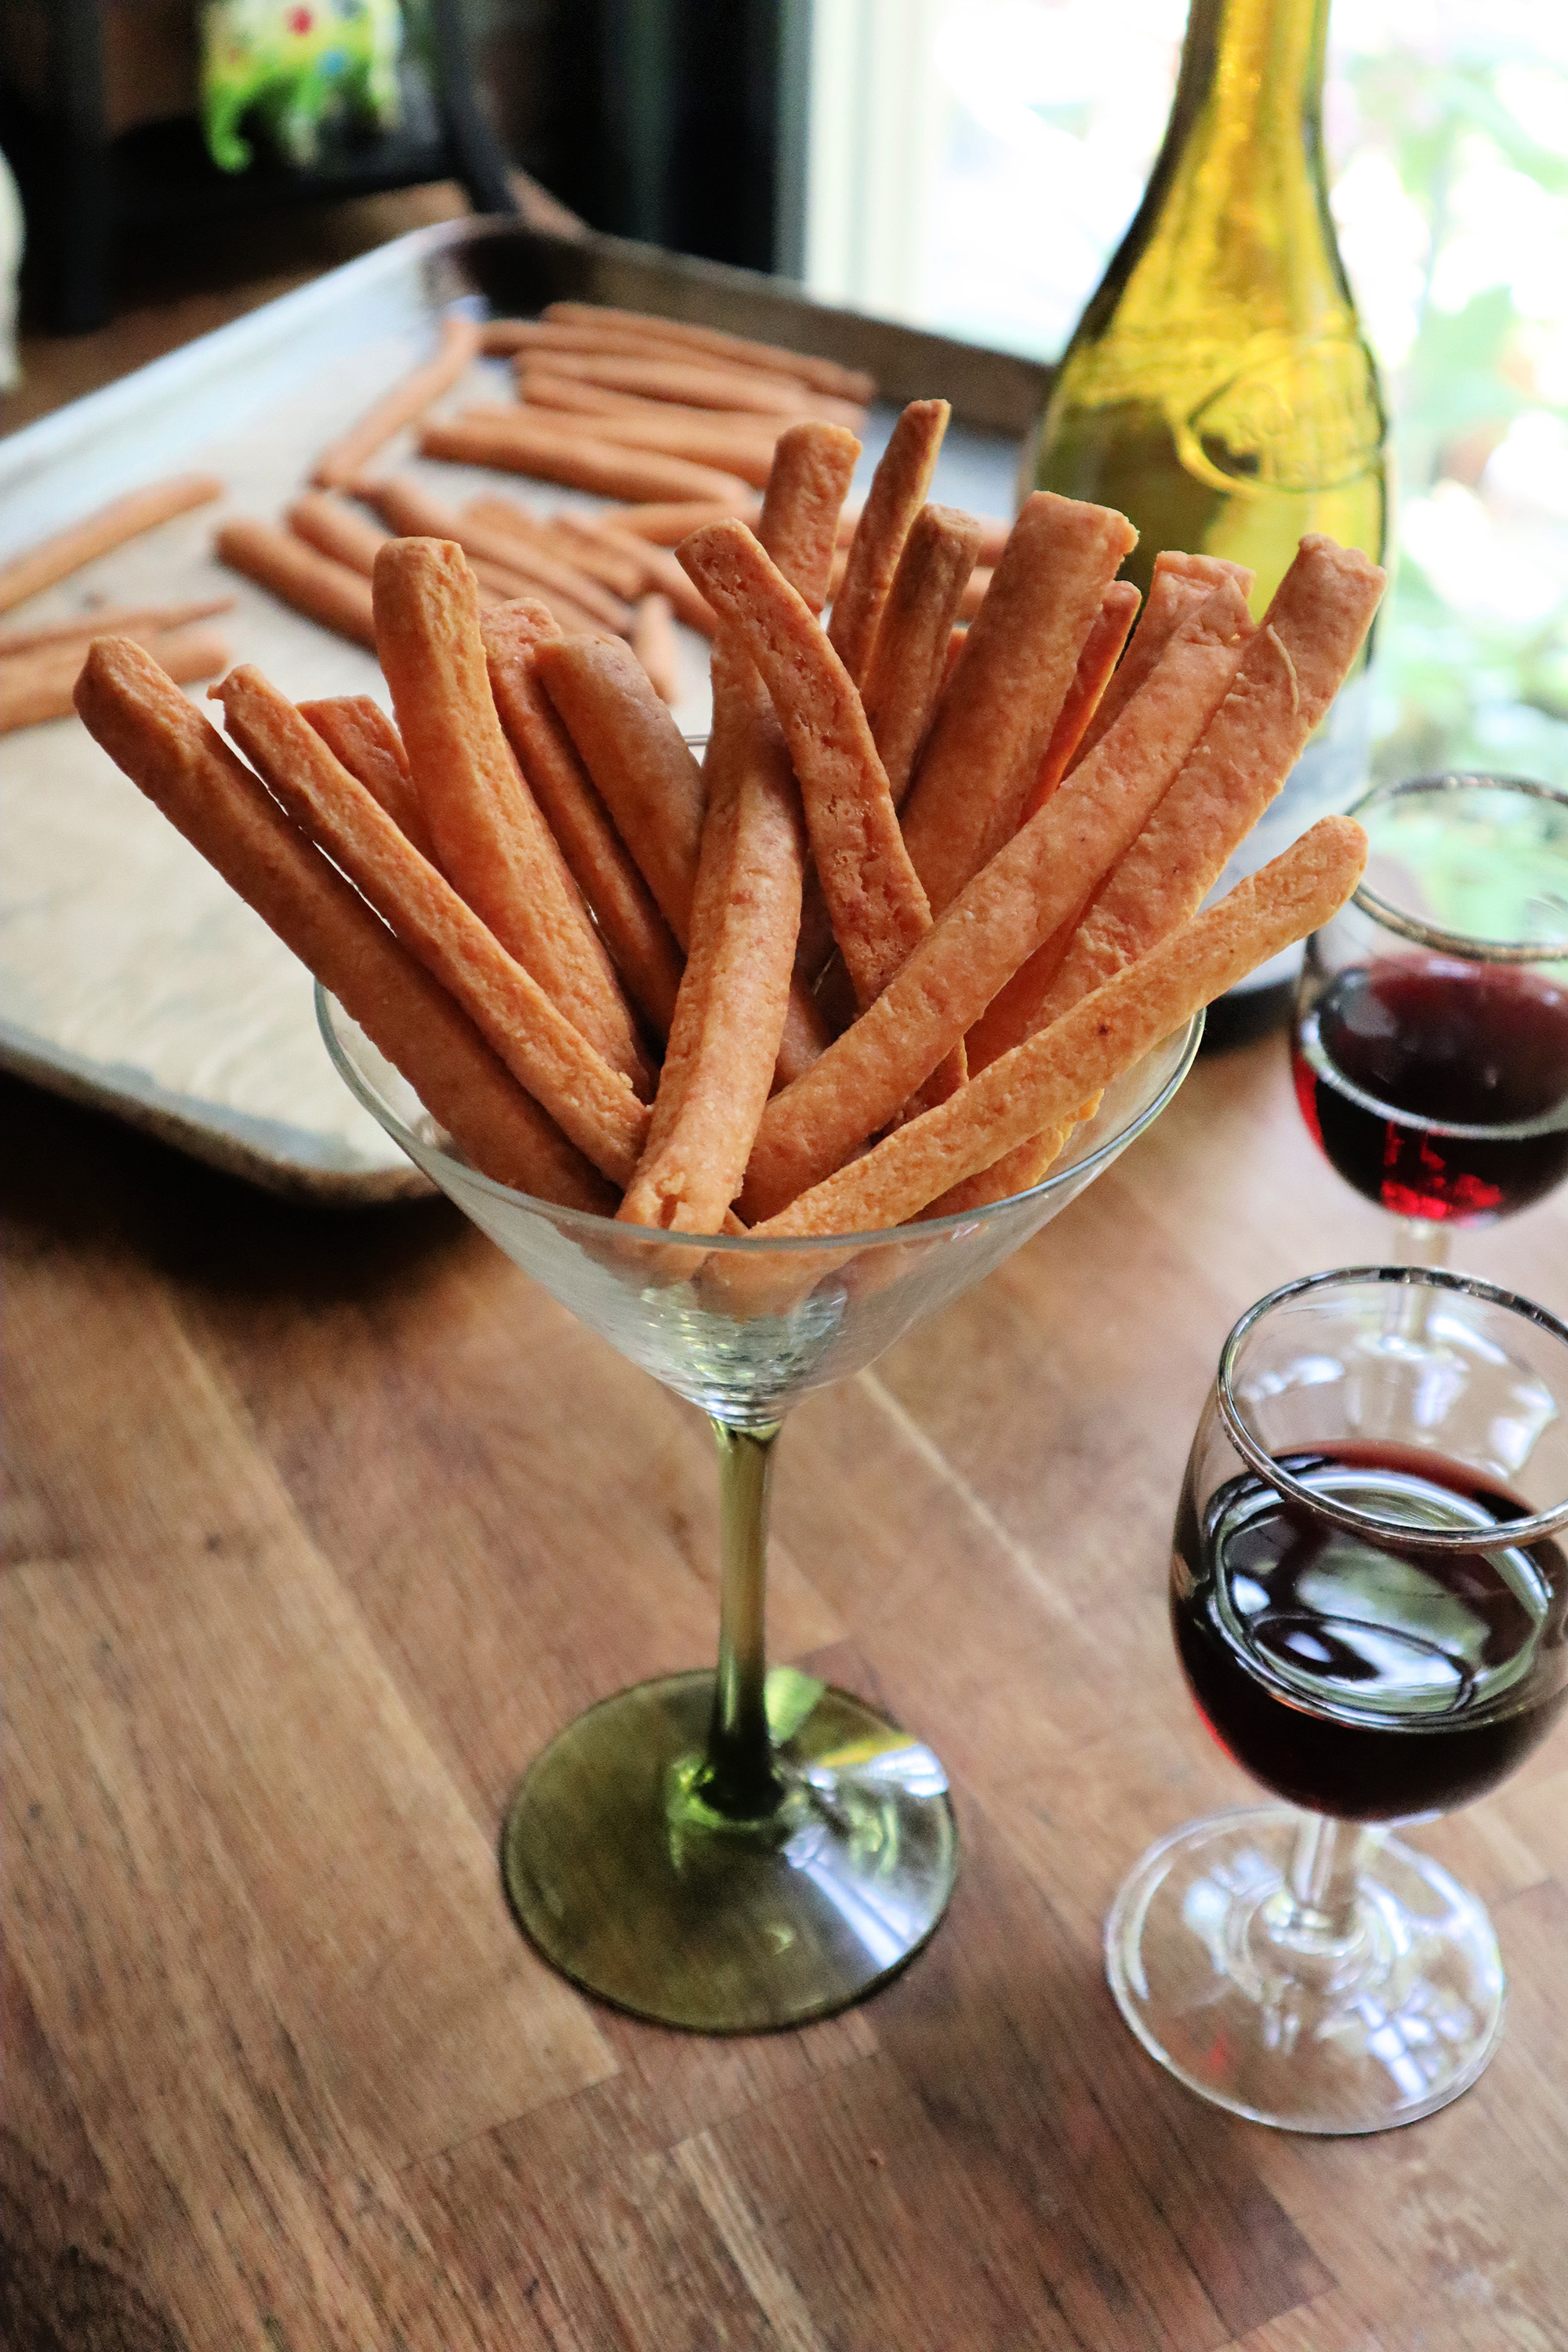 Rich and savory cheese straws